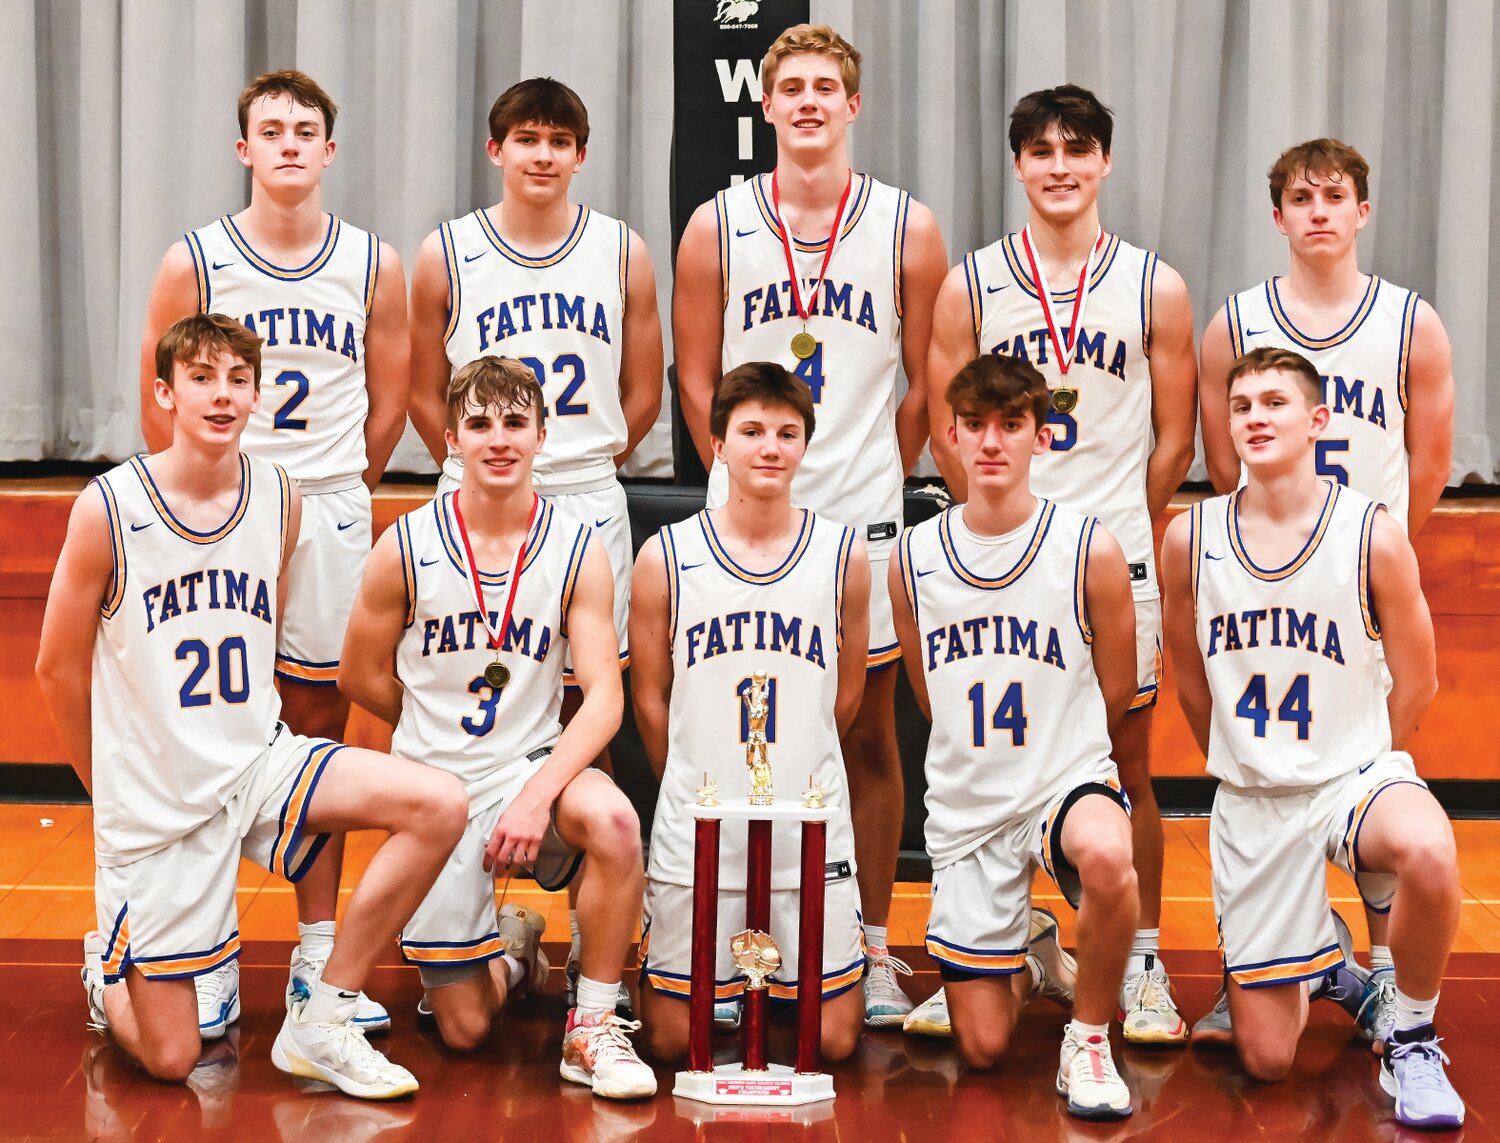 Members of the Fatima Comets, who won the Linn Holiday Tournament are, from left to right, front row, Xavier Stuecken, Max Stuecken, Brody Troesser, Sam Struemph, and Jace Eisterhold; and in the back row, Matthew Robertson, Blake Kliethermes, Levi Robinson, Easton Haslag, and Logan Kliethermes.